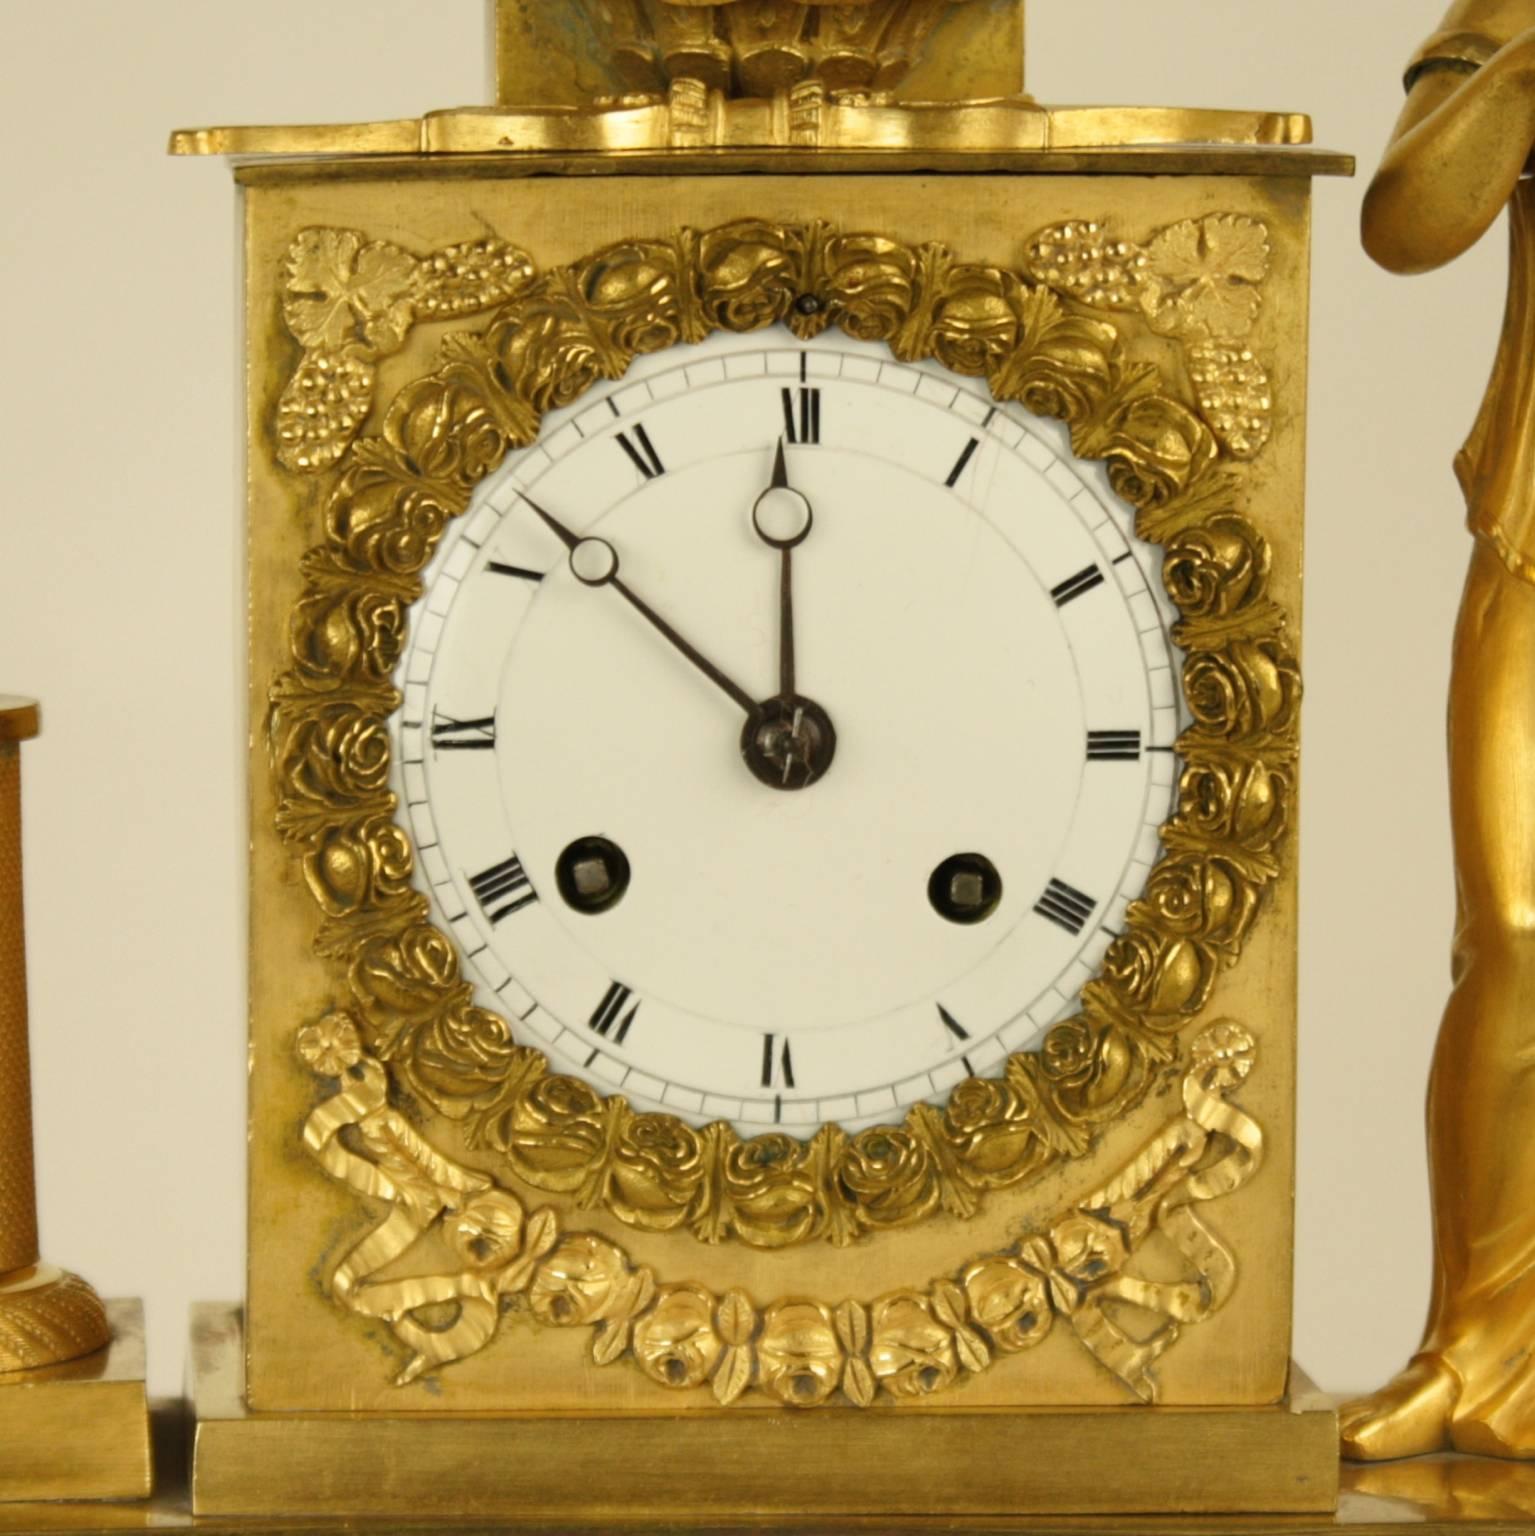 A fine French Empire mantel clock with a rectangular drum case surmounted by a wall fountain featuring a lion mask, flanked by the goddess Flora holding a flower in one hand and a bee the other - as Flora is not only the goddess of flowers but also